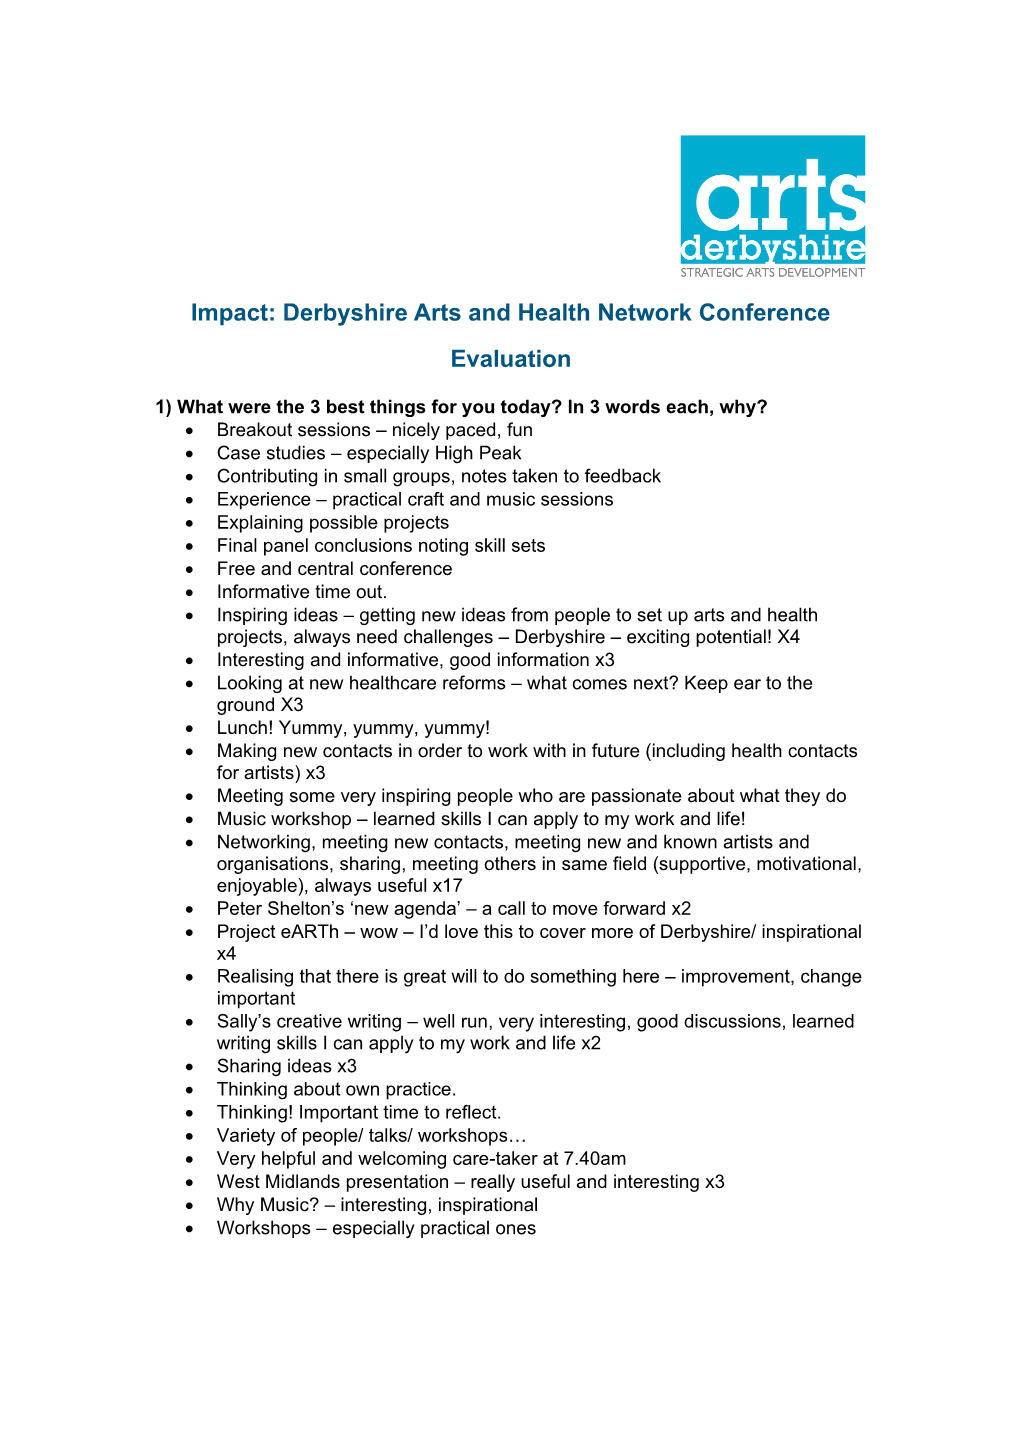 Impact: Derbyshire Arts and Health Network Conference